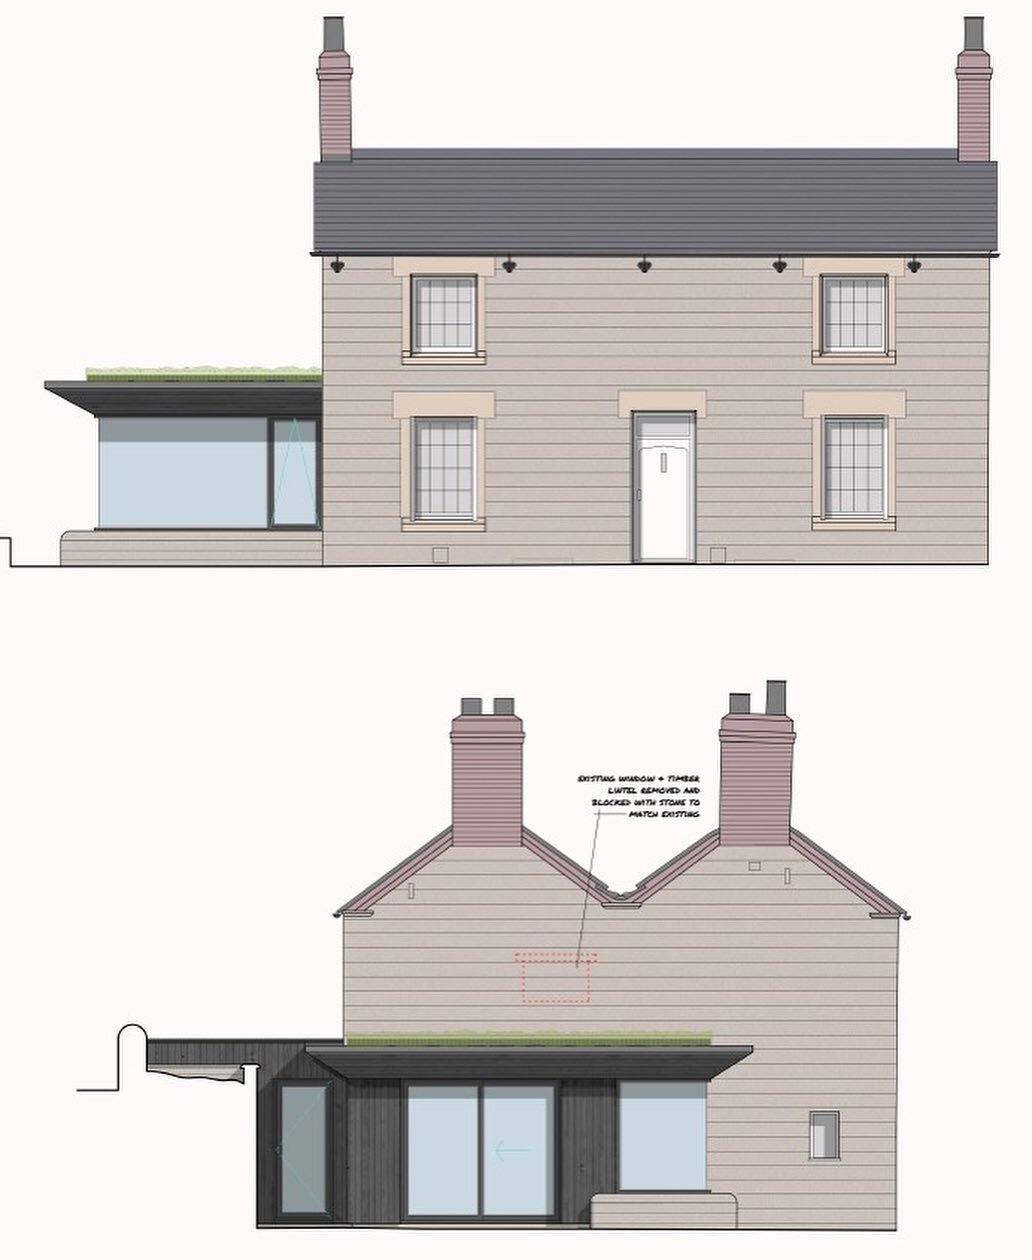 We're pleased to have secured Planning and Listed Building Consent for this residential extension to a charming Grade II listed former farmhouse which will enable access to stunning views across the Derwent Valley! The process has been lengthy but th